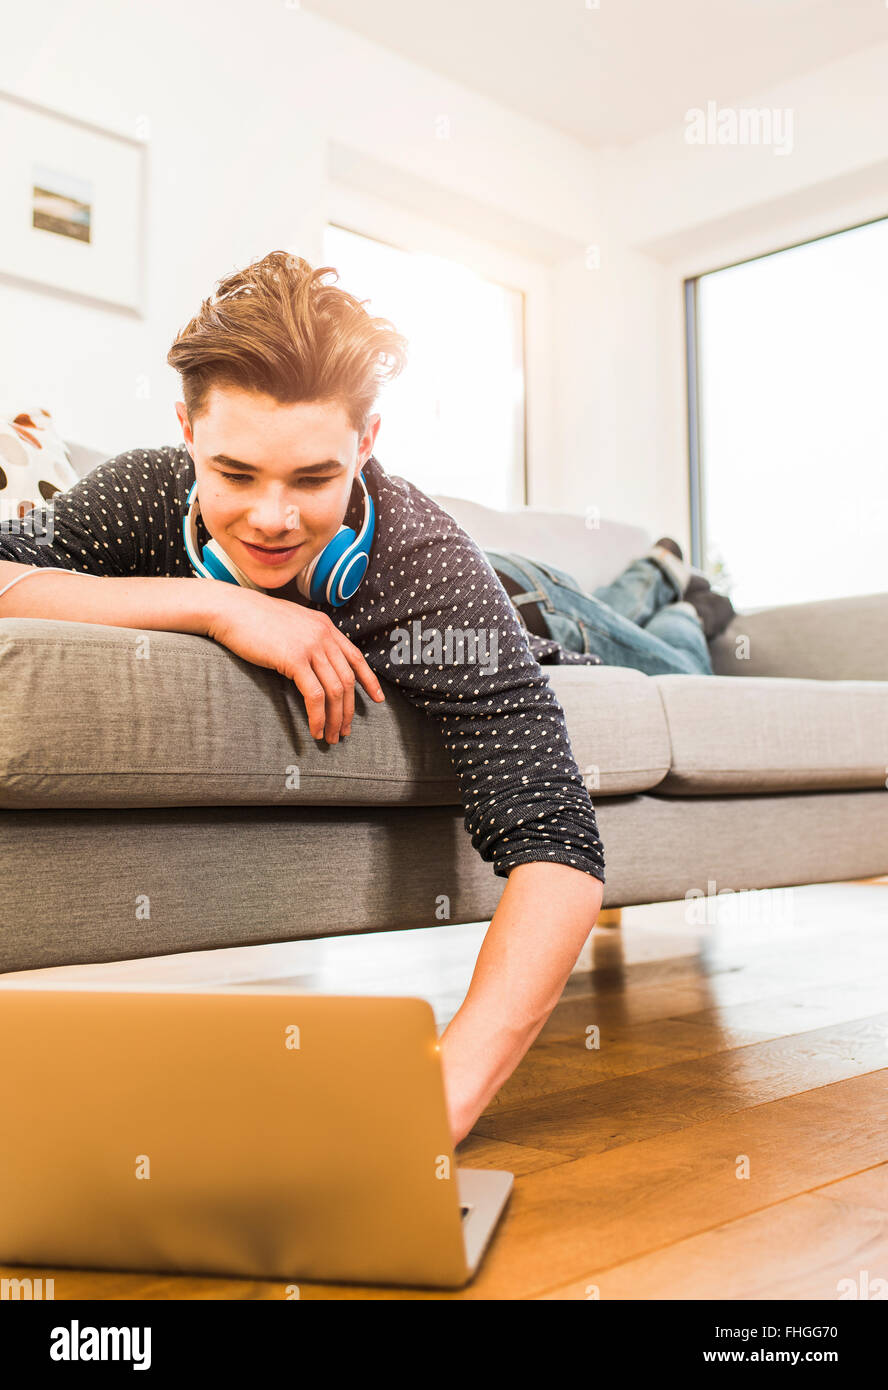 Young man lying on couch using laptop Stock Photo